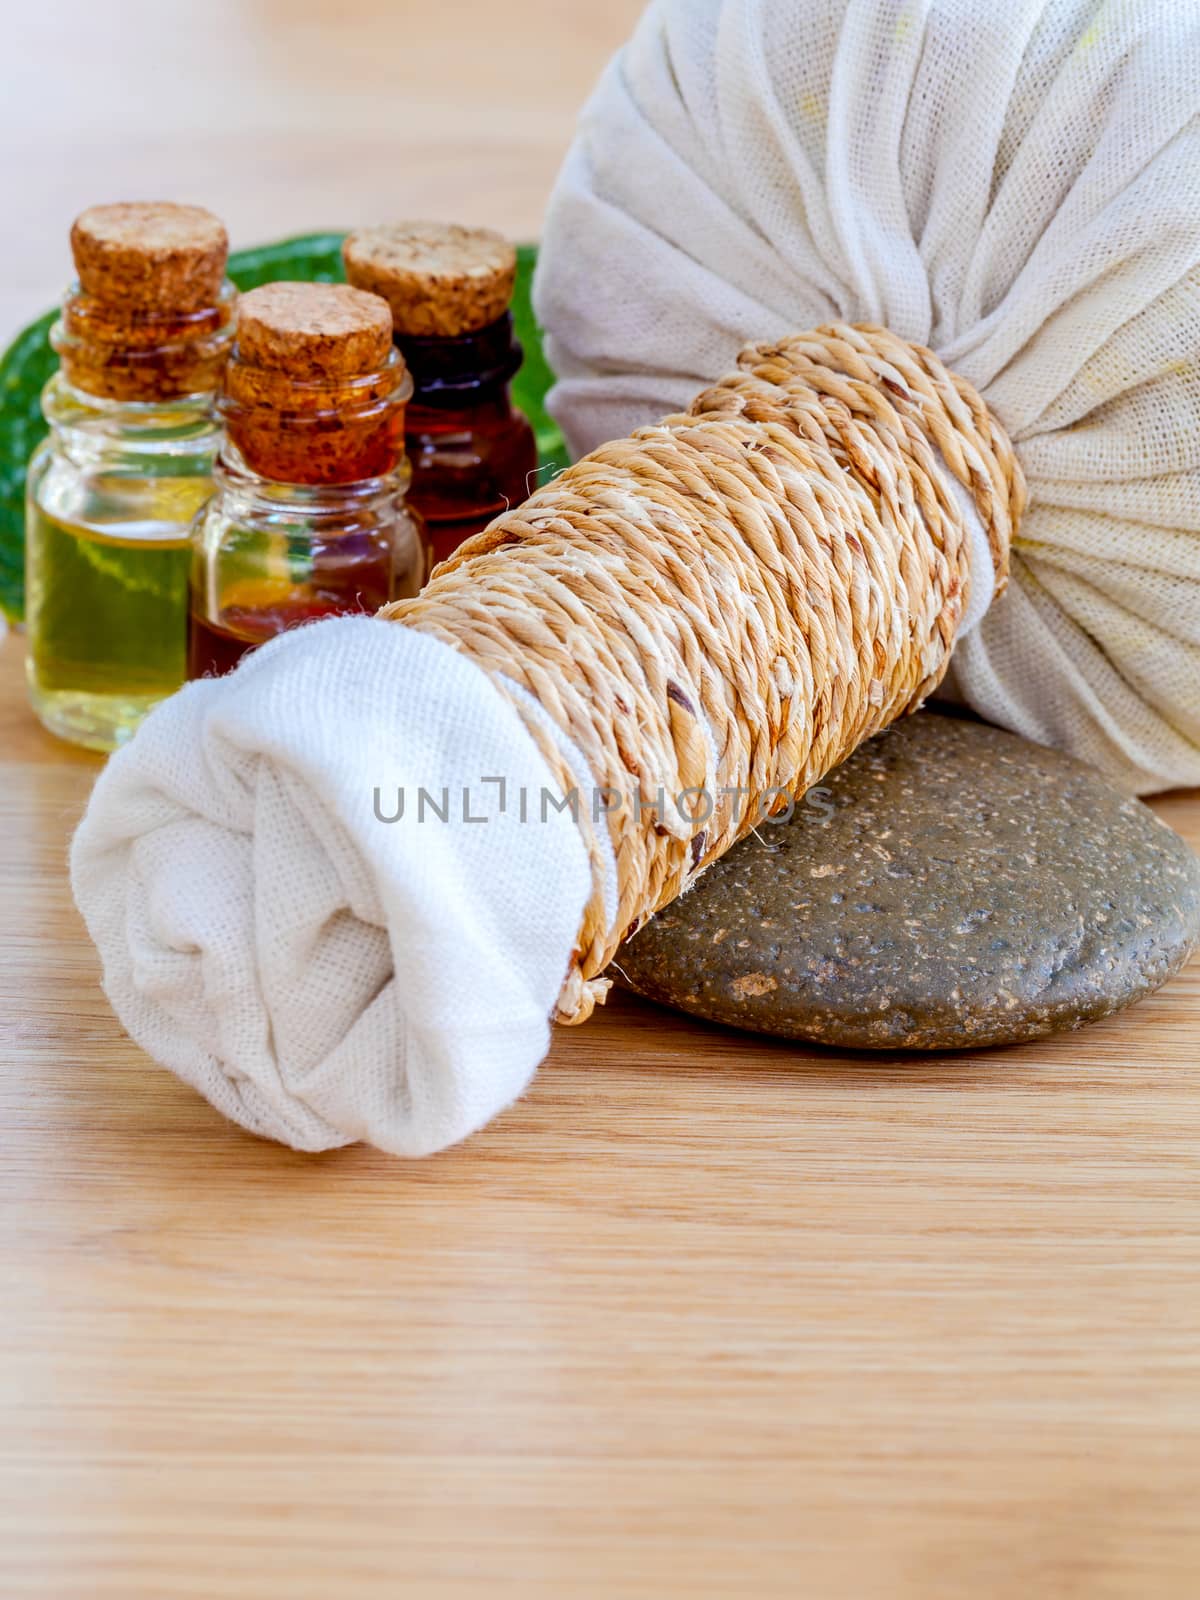 Natural Spa Ingredients . The herbal compress ball and massage o by kerdkanno